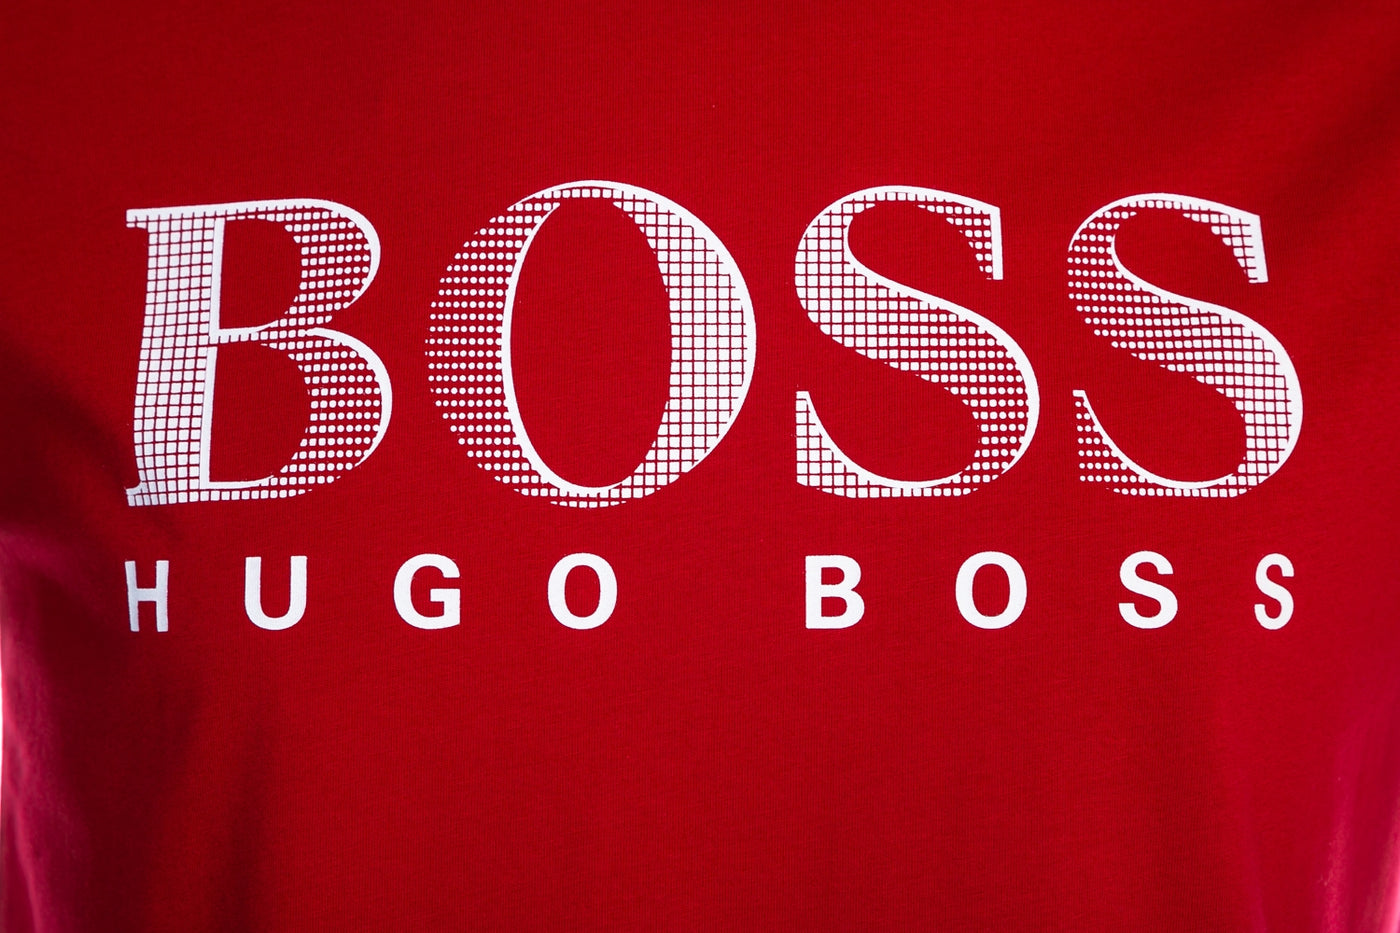 BOSS RN UV Protection T Shirt in Red